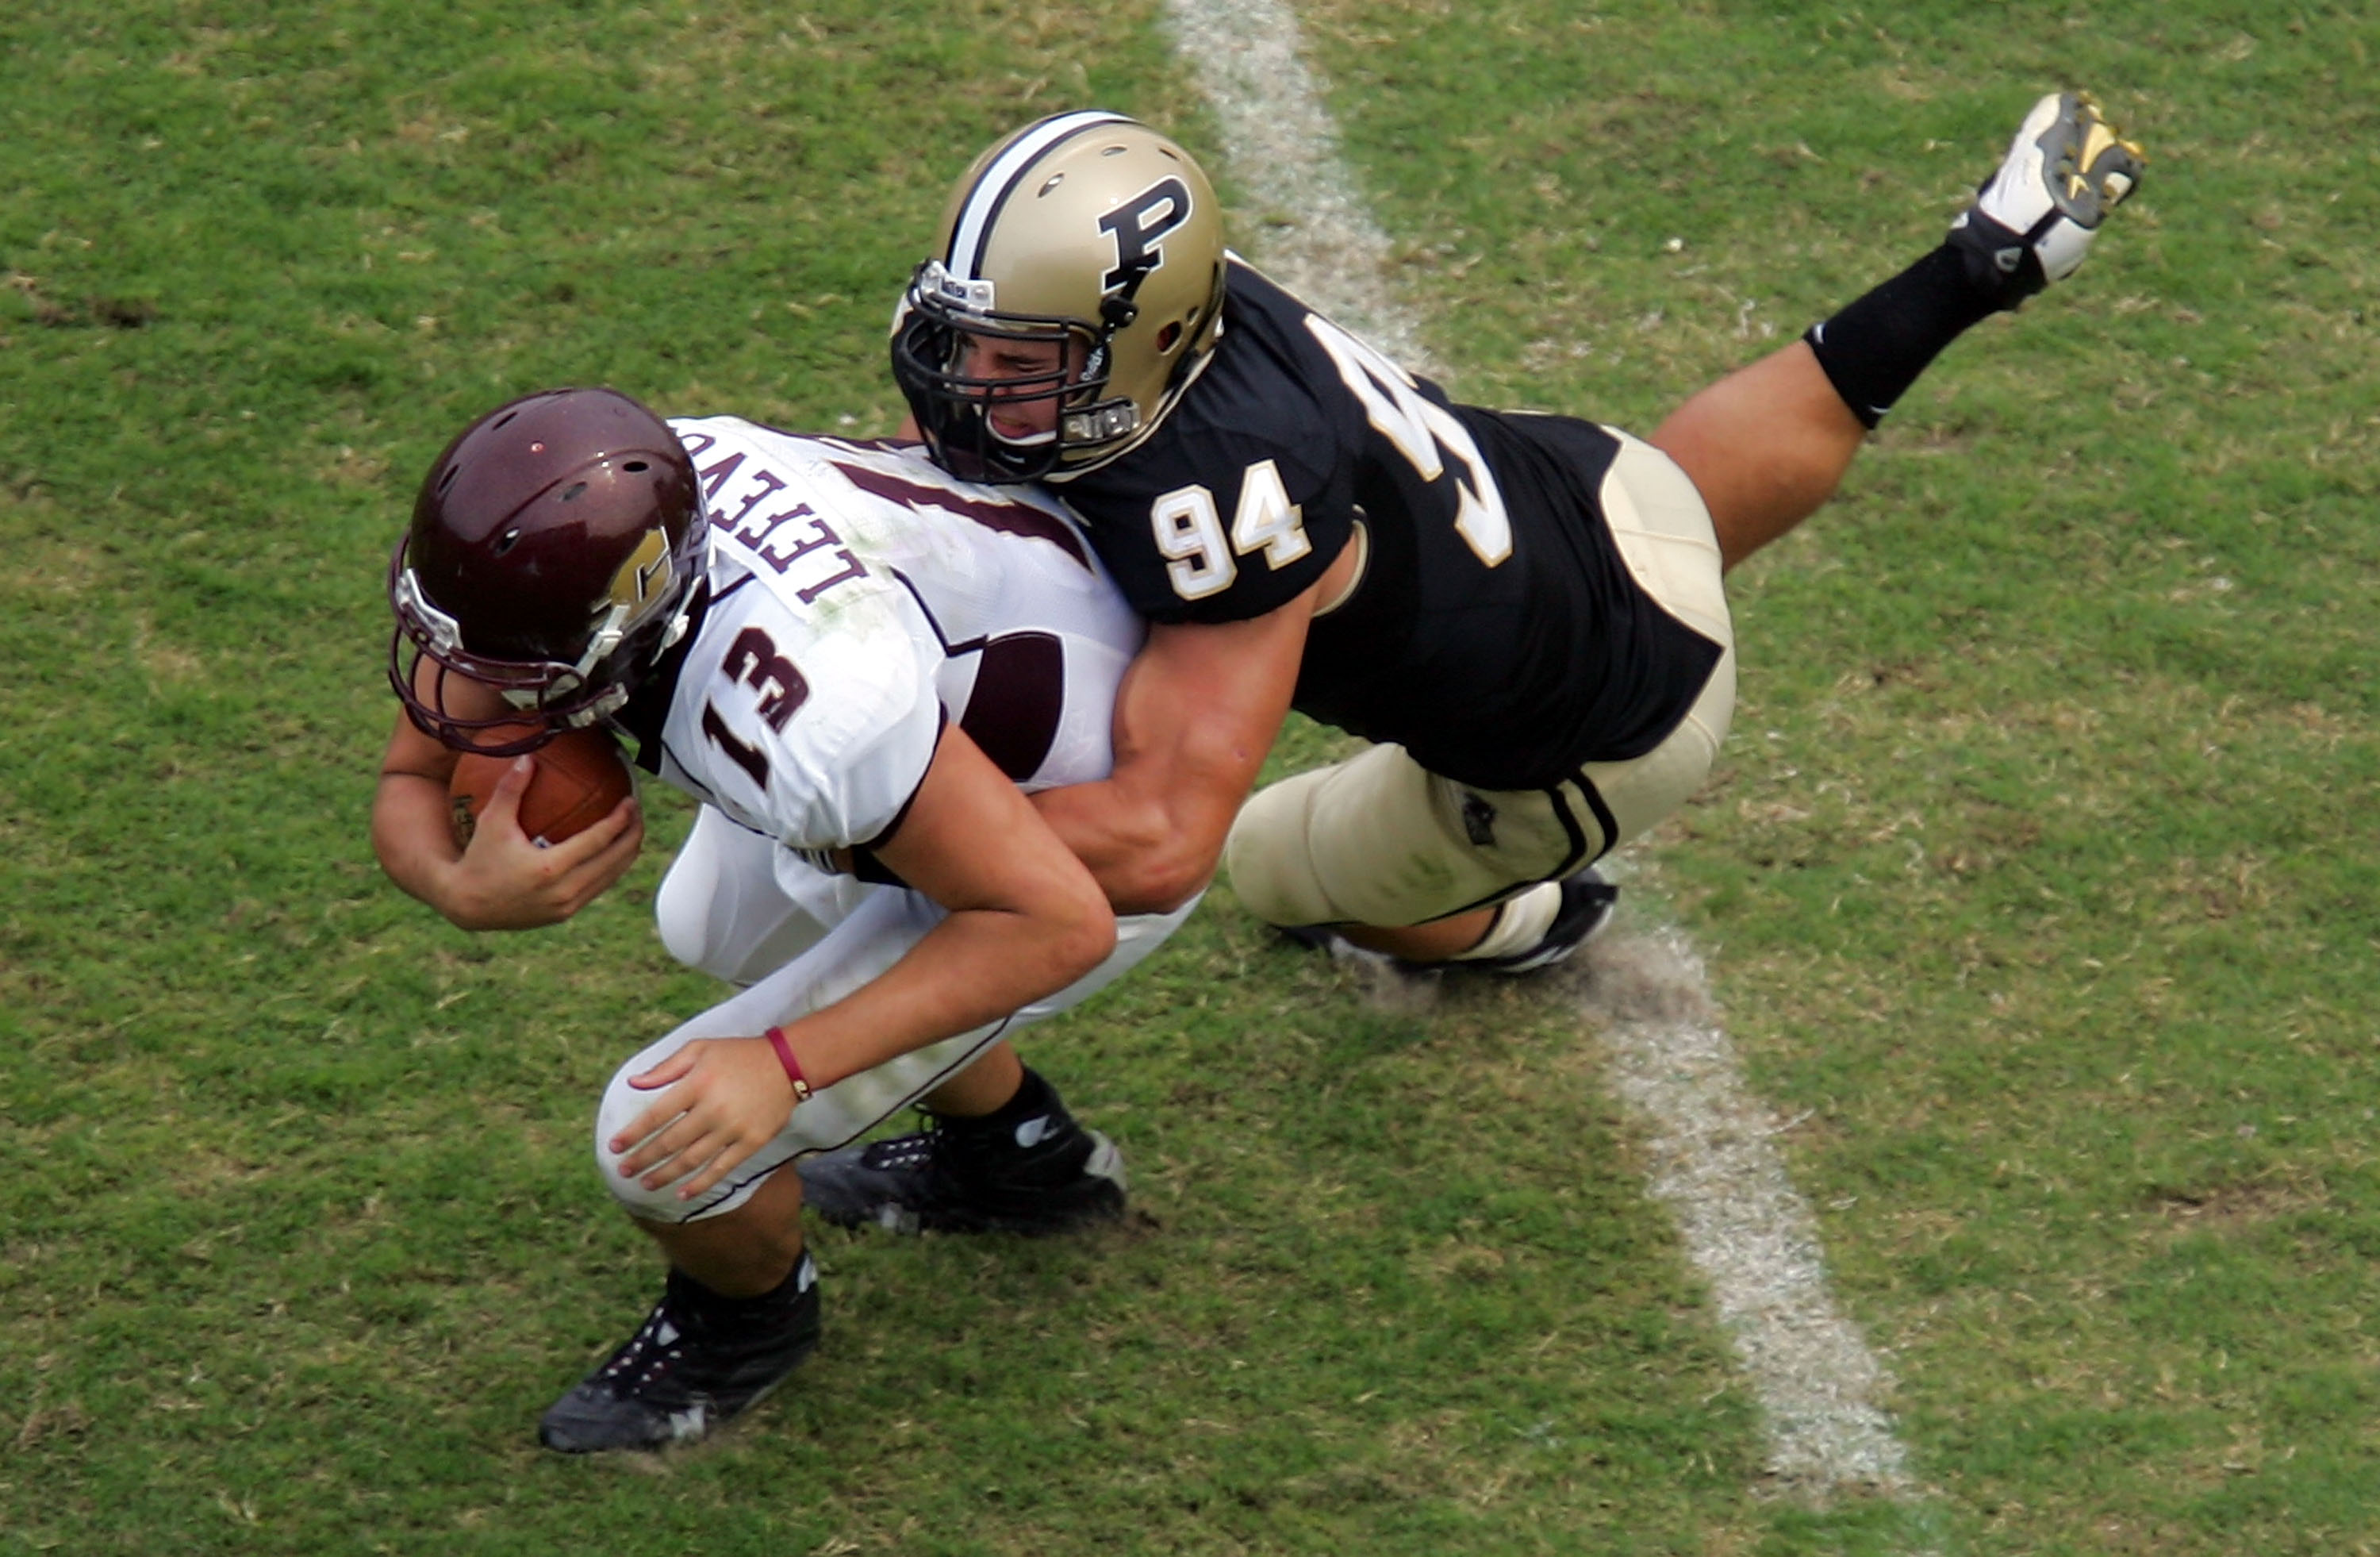 WEST LAFAYETTE, IN - SEPTEMBER 20:  Quarterback Dan LeFevour #13 of the Central Michigan Chippewas is tackled by Ryan Kerrigan #94 of the Purdue Boilermakers at Ross-Ade Stadium on September 20, 2008 in West Lafayette, Indiana.  (Photo by Ronald Martinez/